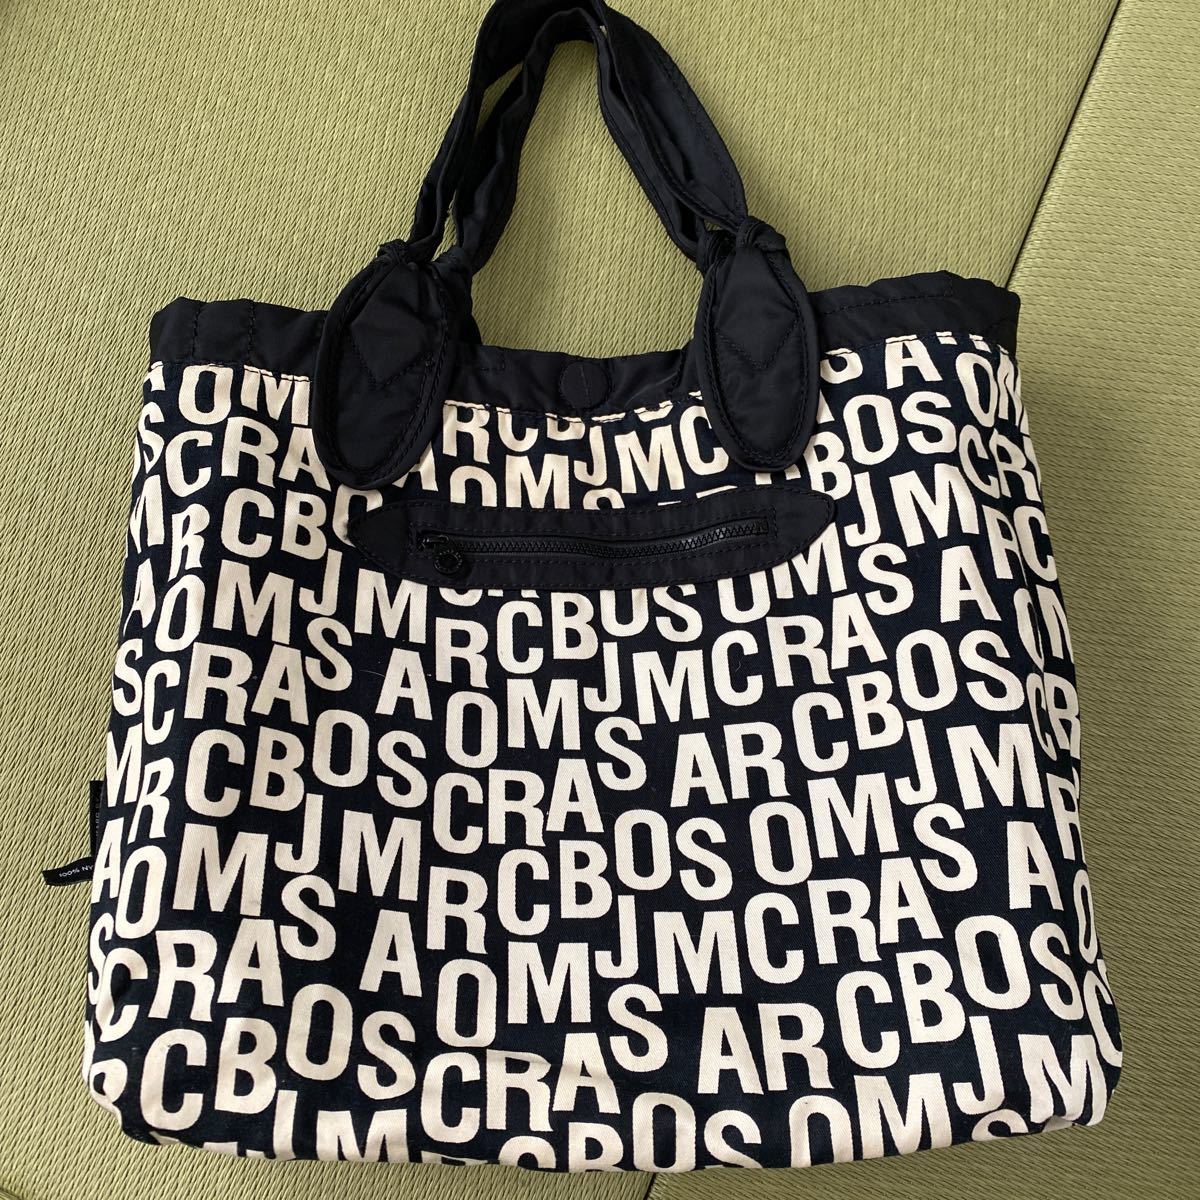 MARC BY MARC JACOBS ナイロントートバッグ マークバイマークジェイコブス トートバッグ マザーズバッグ